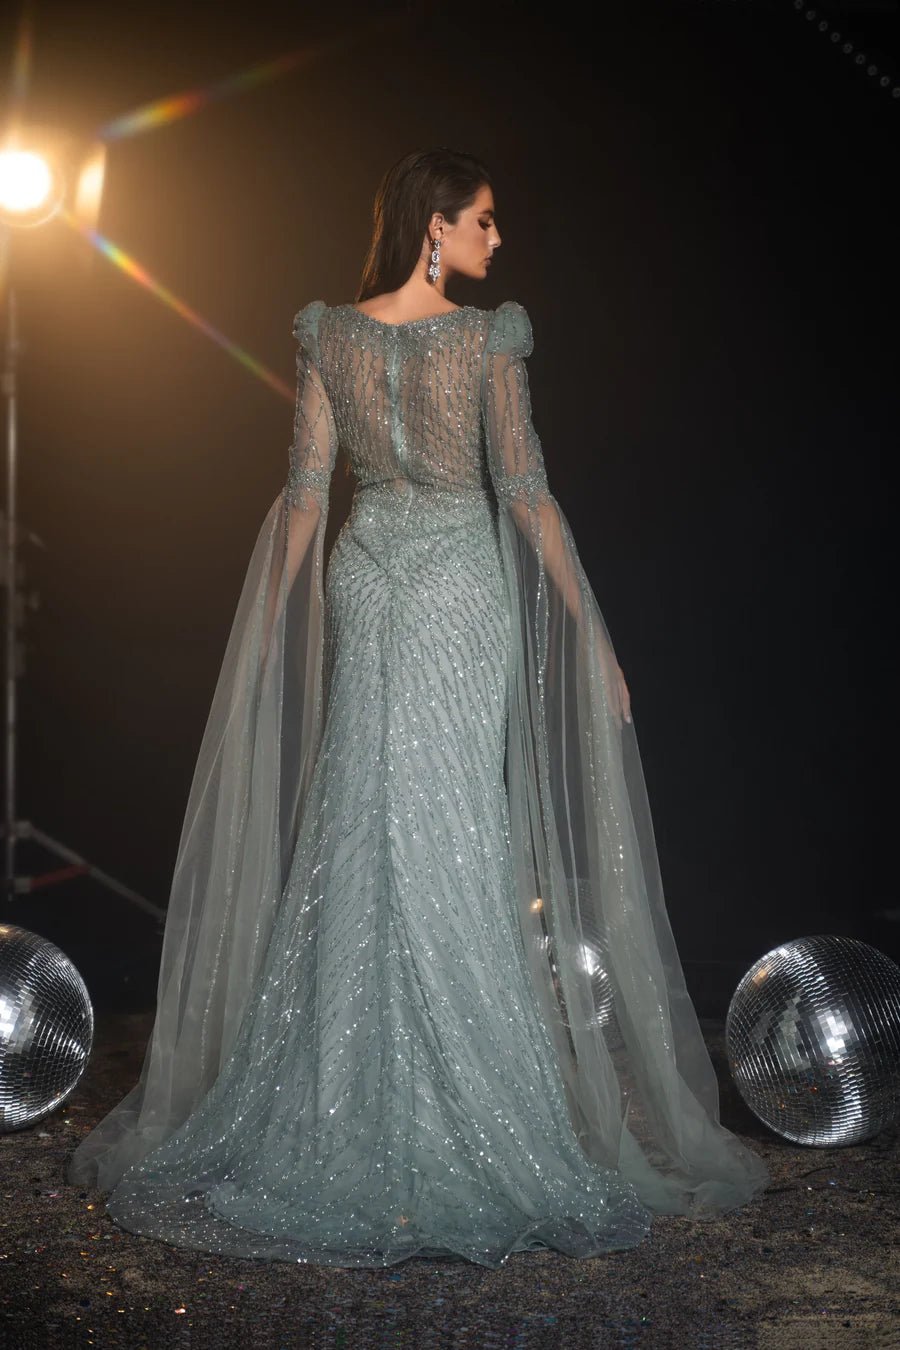 Luxurious Sage Green Sequin Evening Gown with Cape Sleeves - Pretty Sequin Dress and Elegant Cape Dress Plus Size - WonderlandByLilian